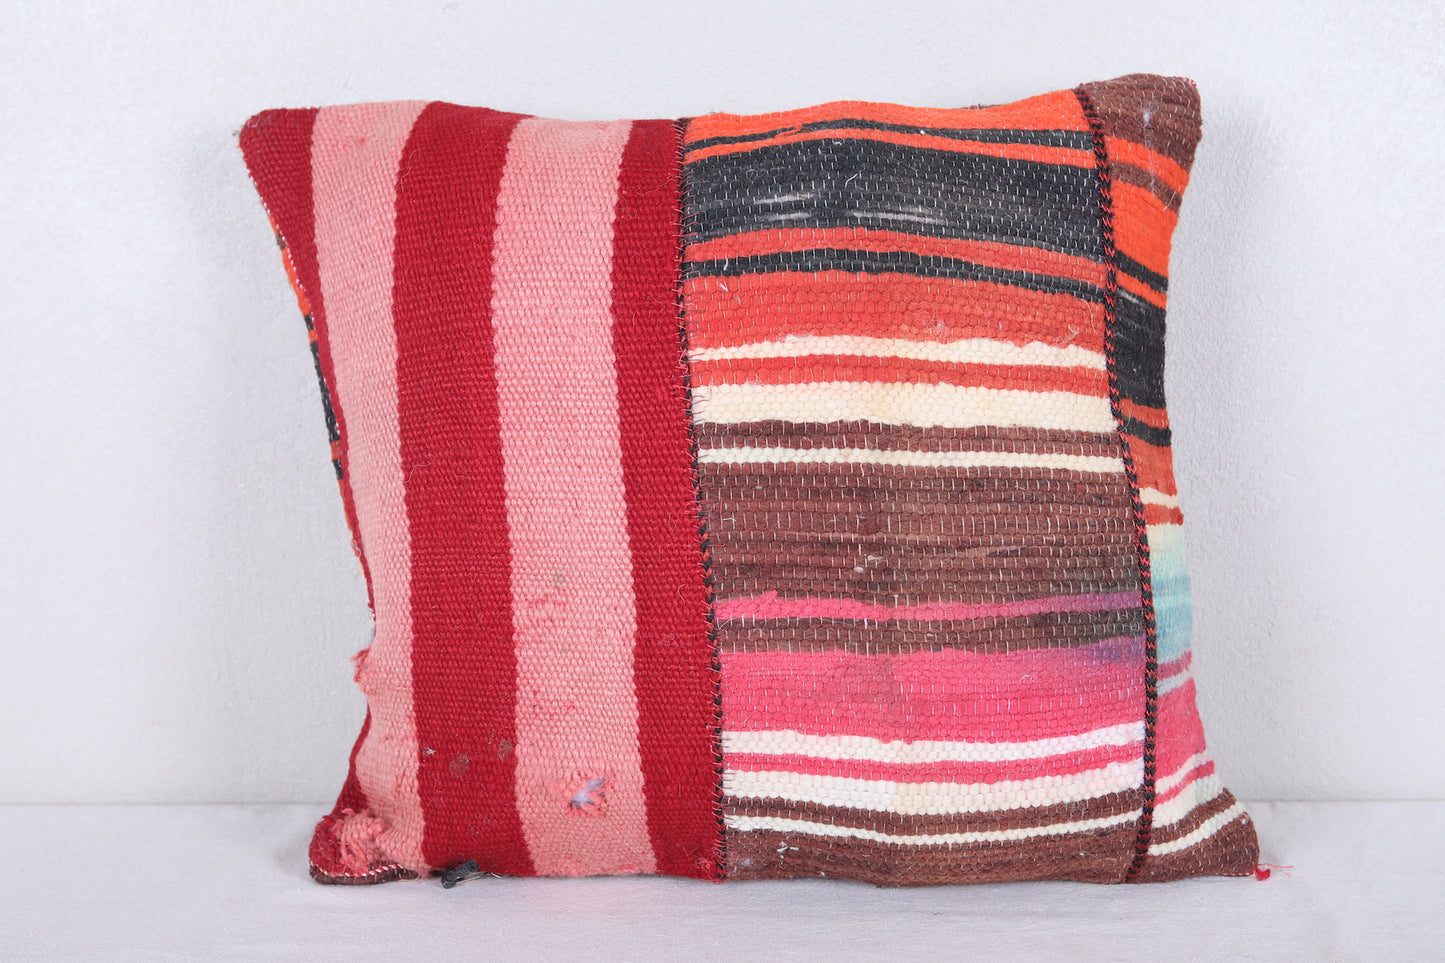 Vintage moroccan handwoven kilim pillow 16.5 INCHES X 18.1 INCHES